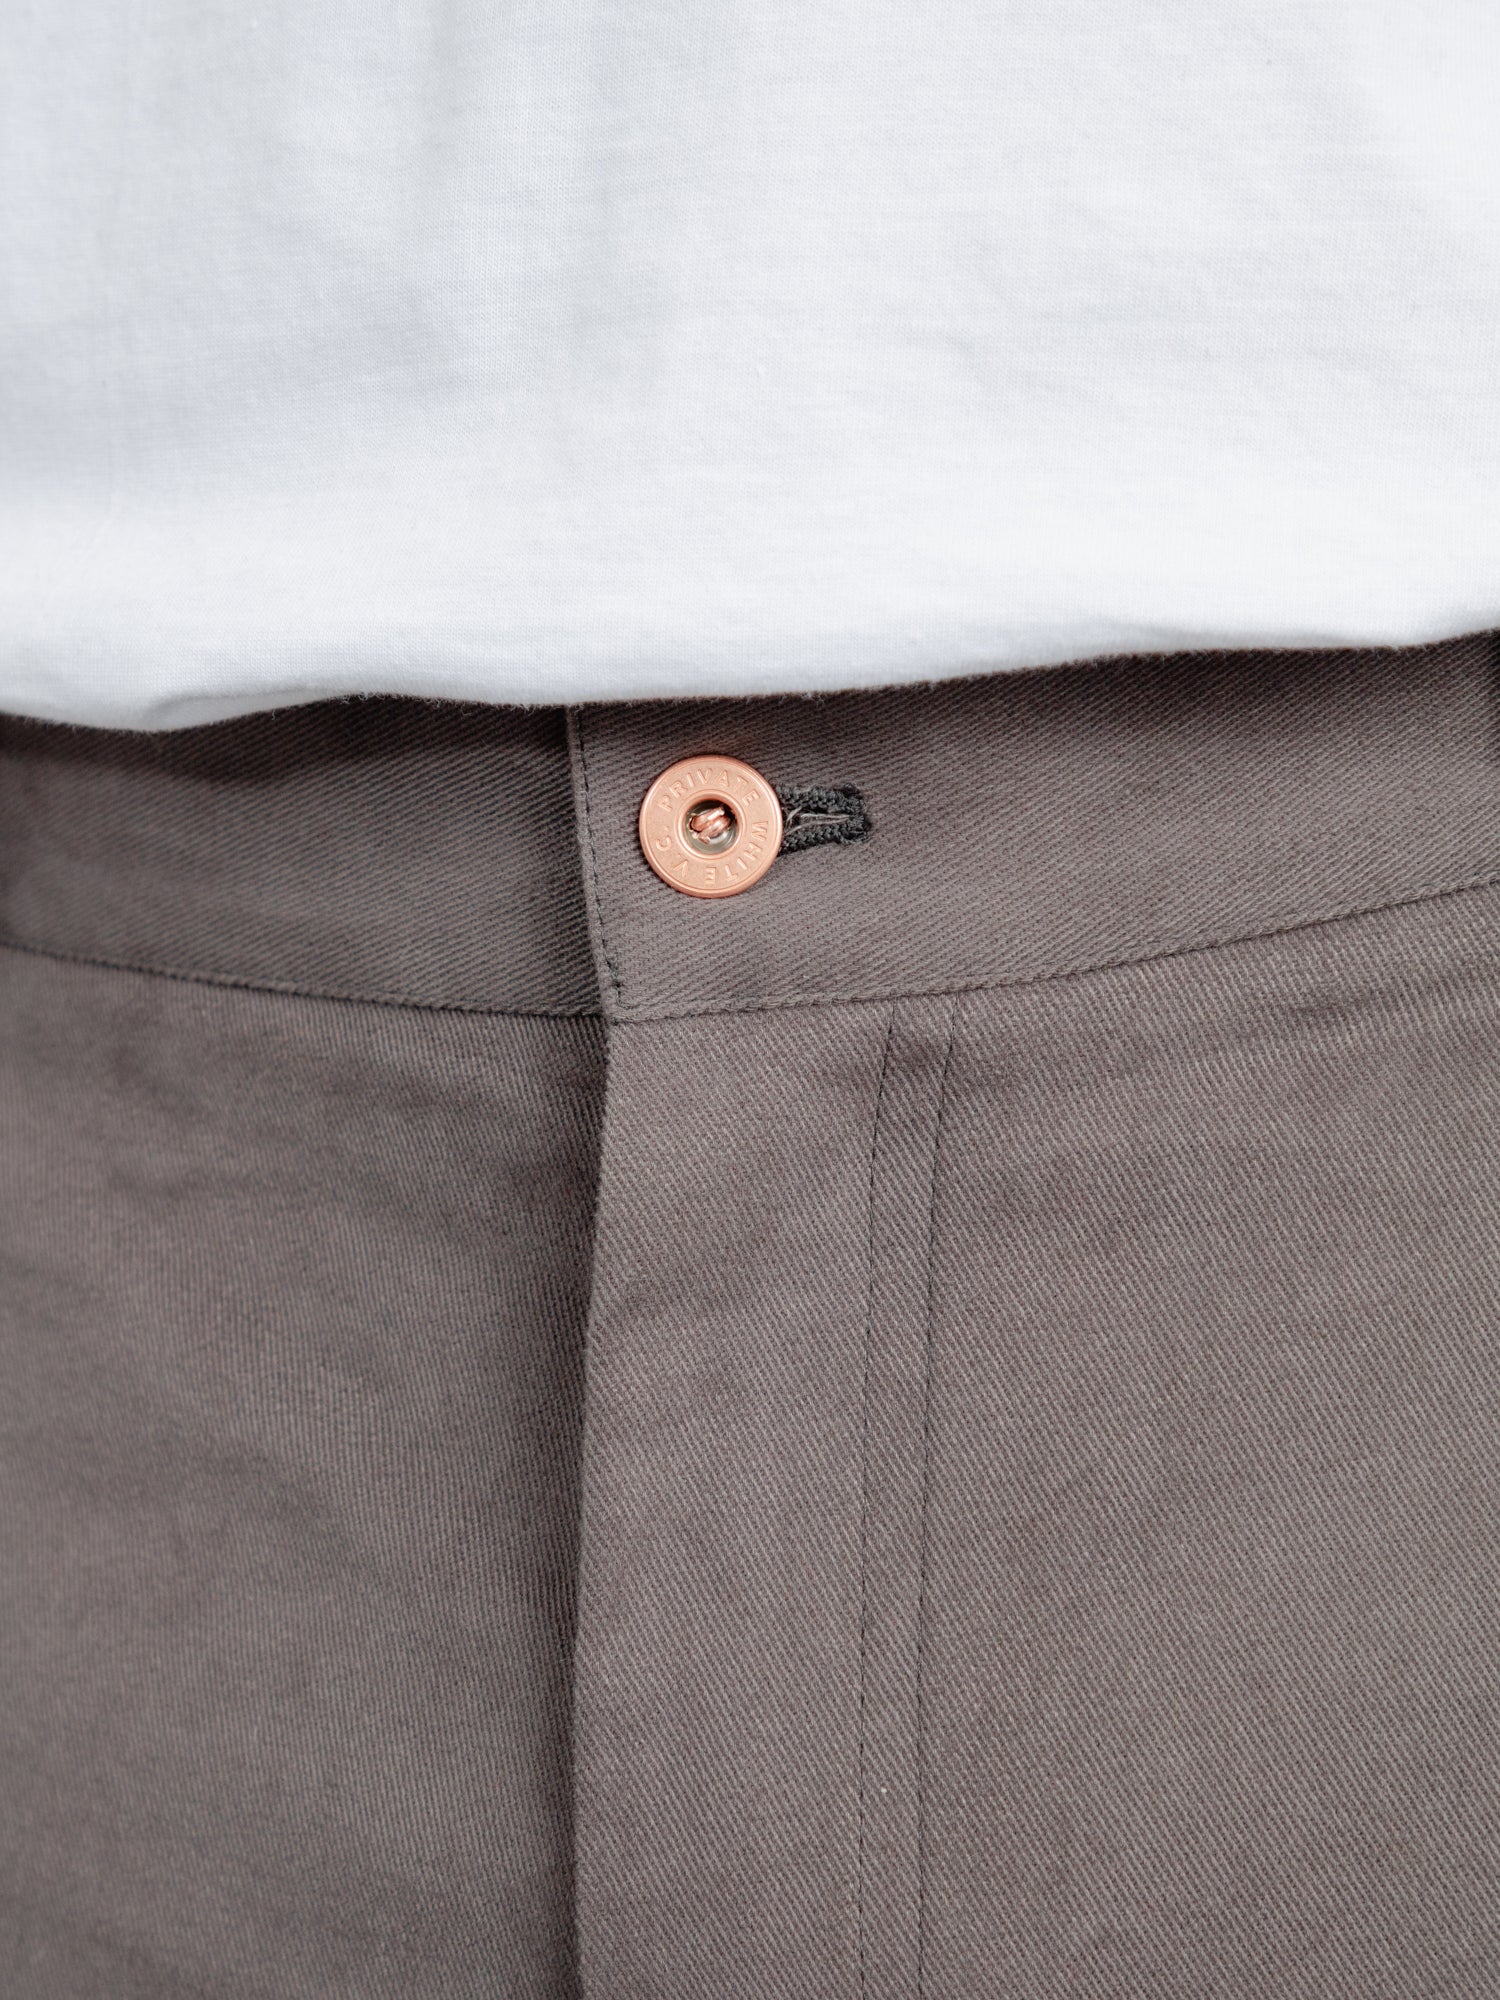 The Brushed Twill Chino – PrivateWhite V.C.